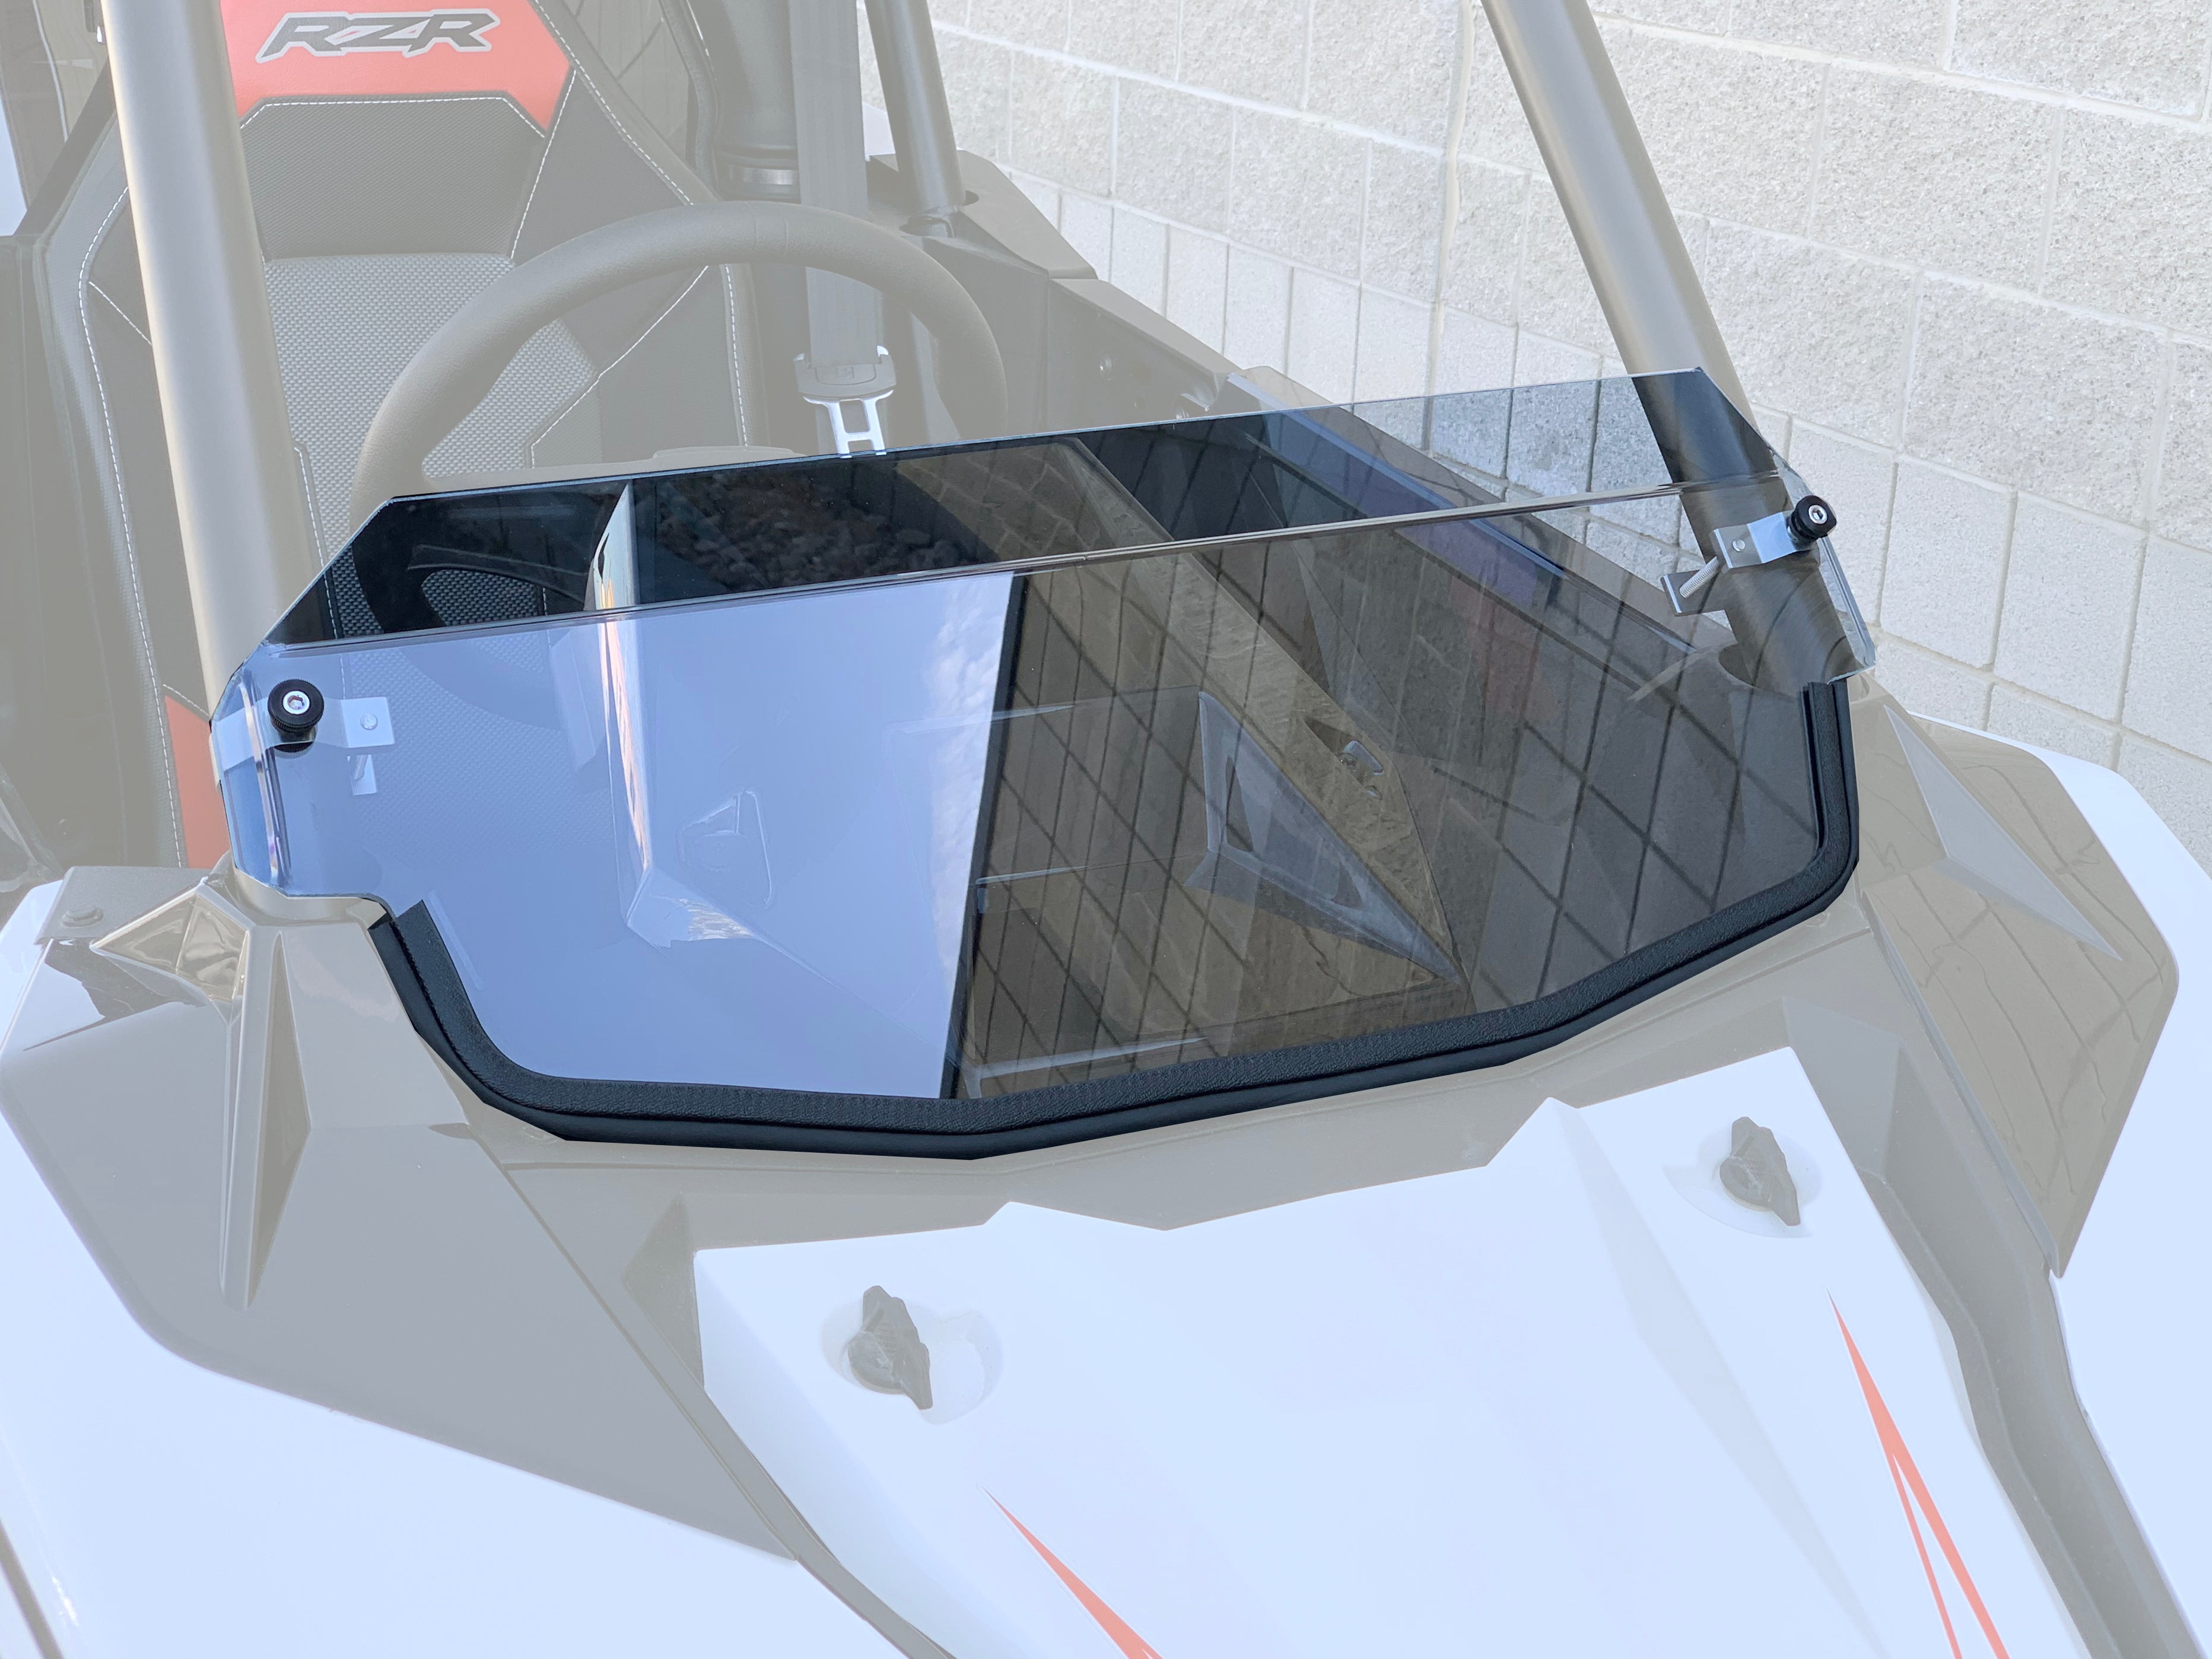 Polaris RS1 Hard Coated Half Windshield, Billet Clamps, Polycarbonate